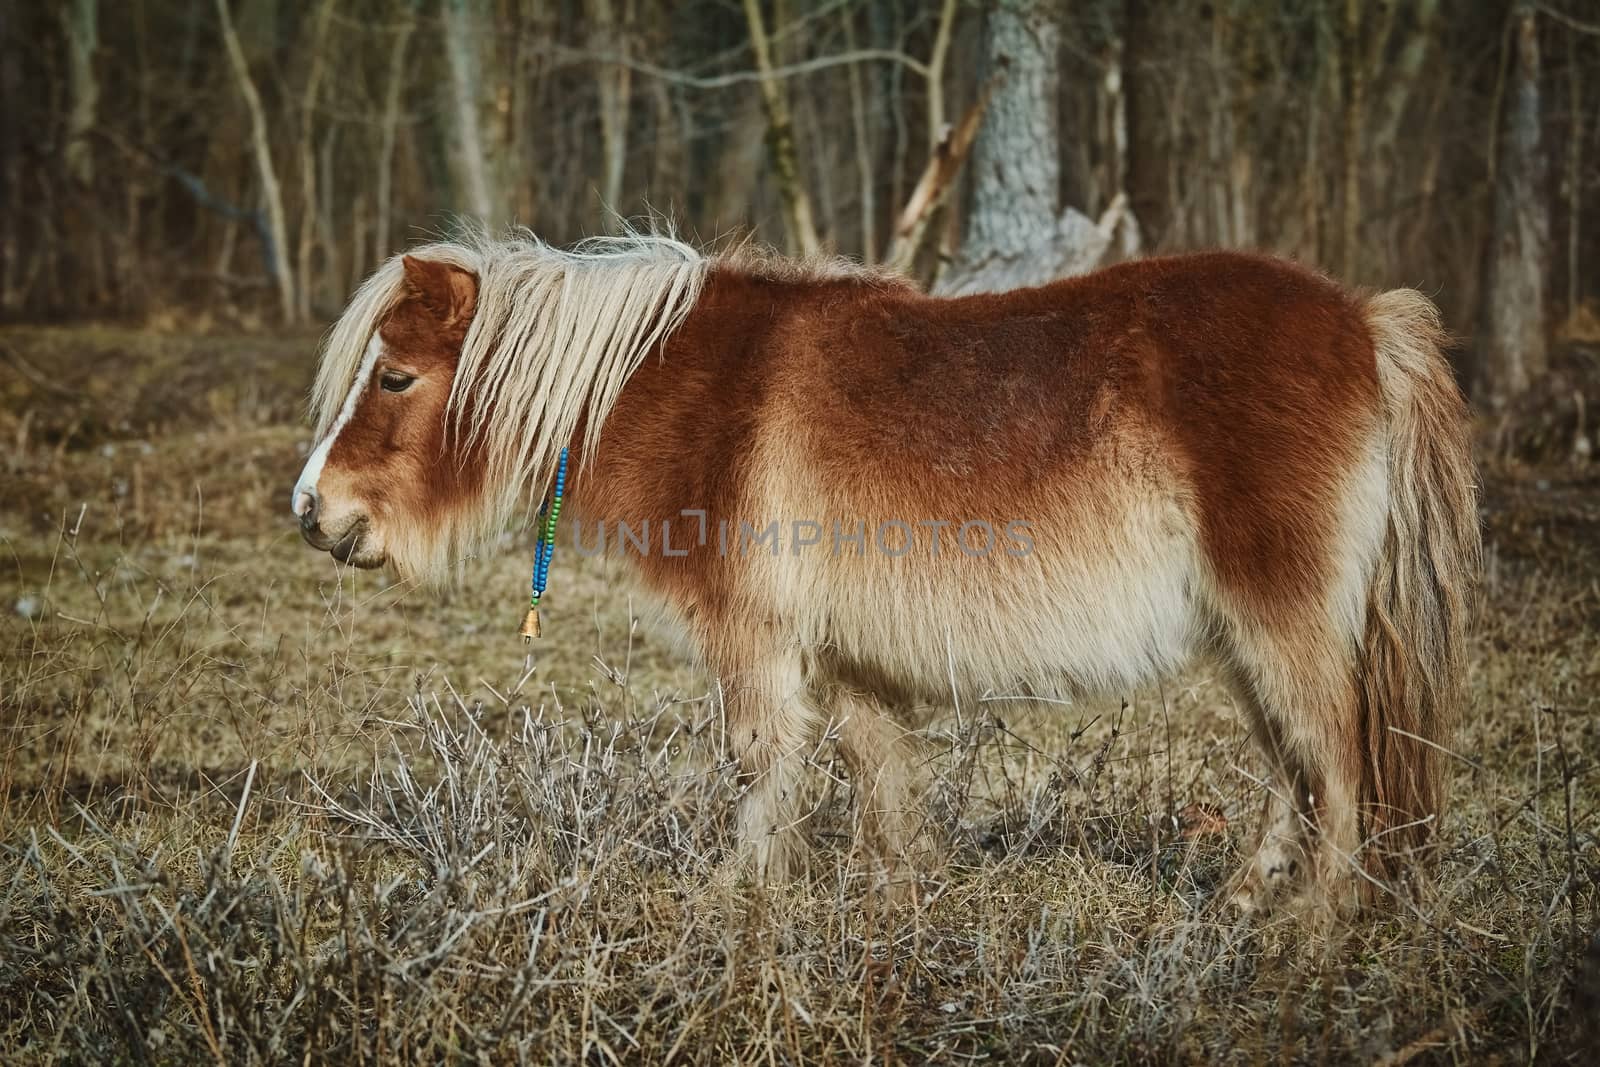 Little Brown Pony Grazes near the Forest